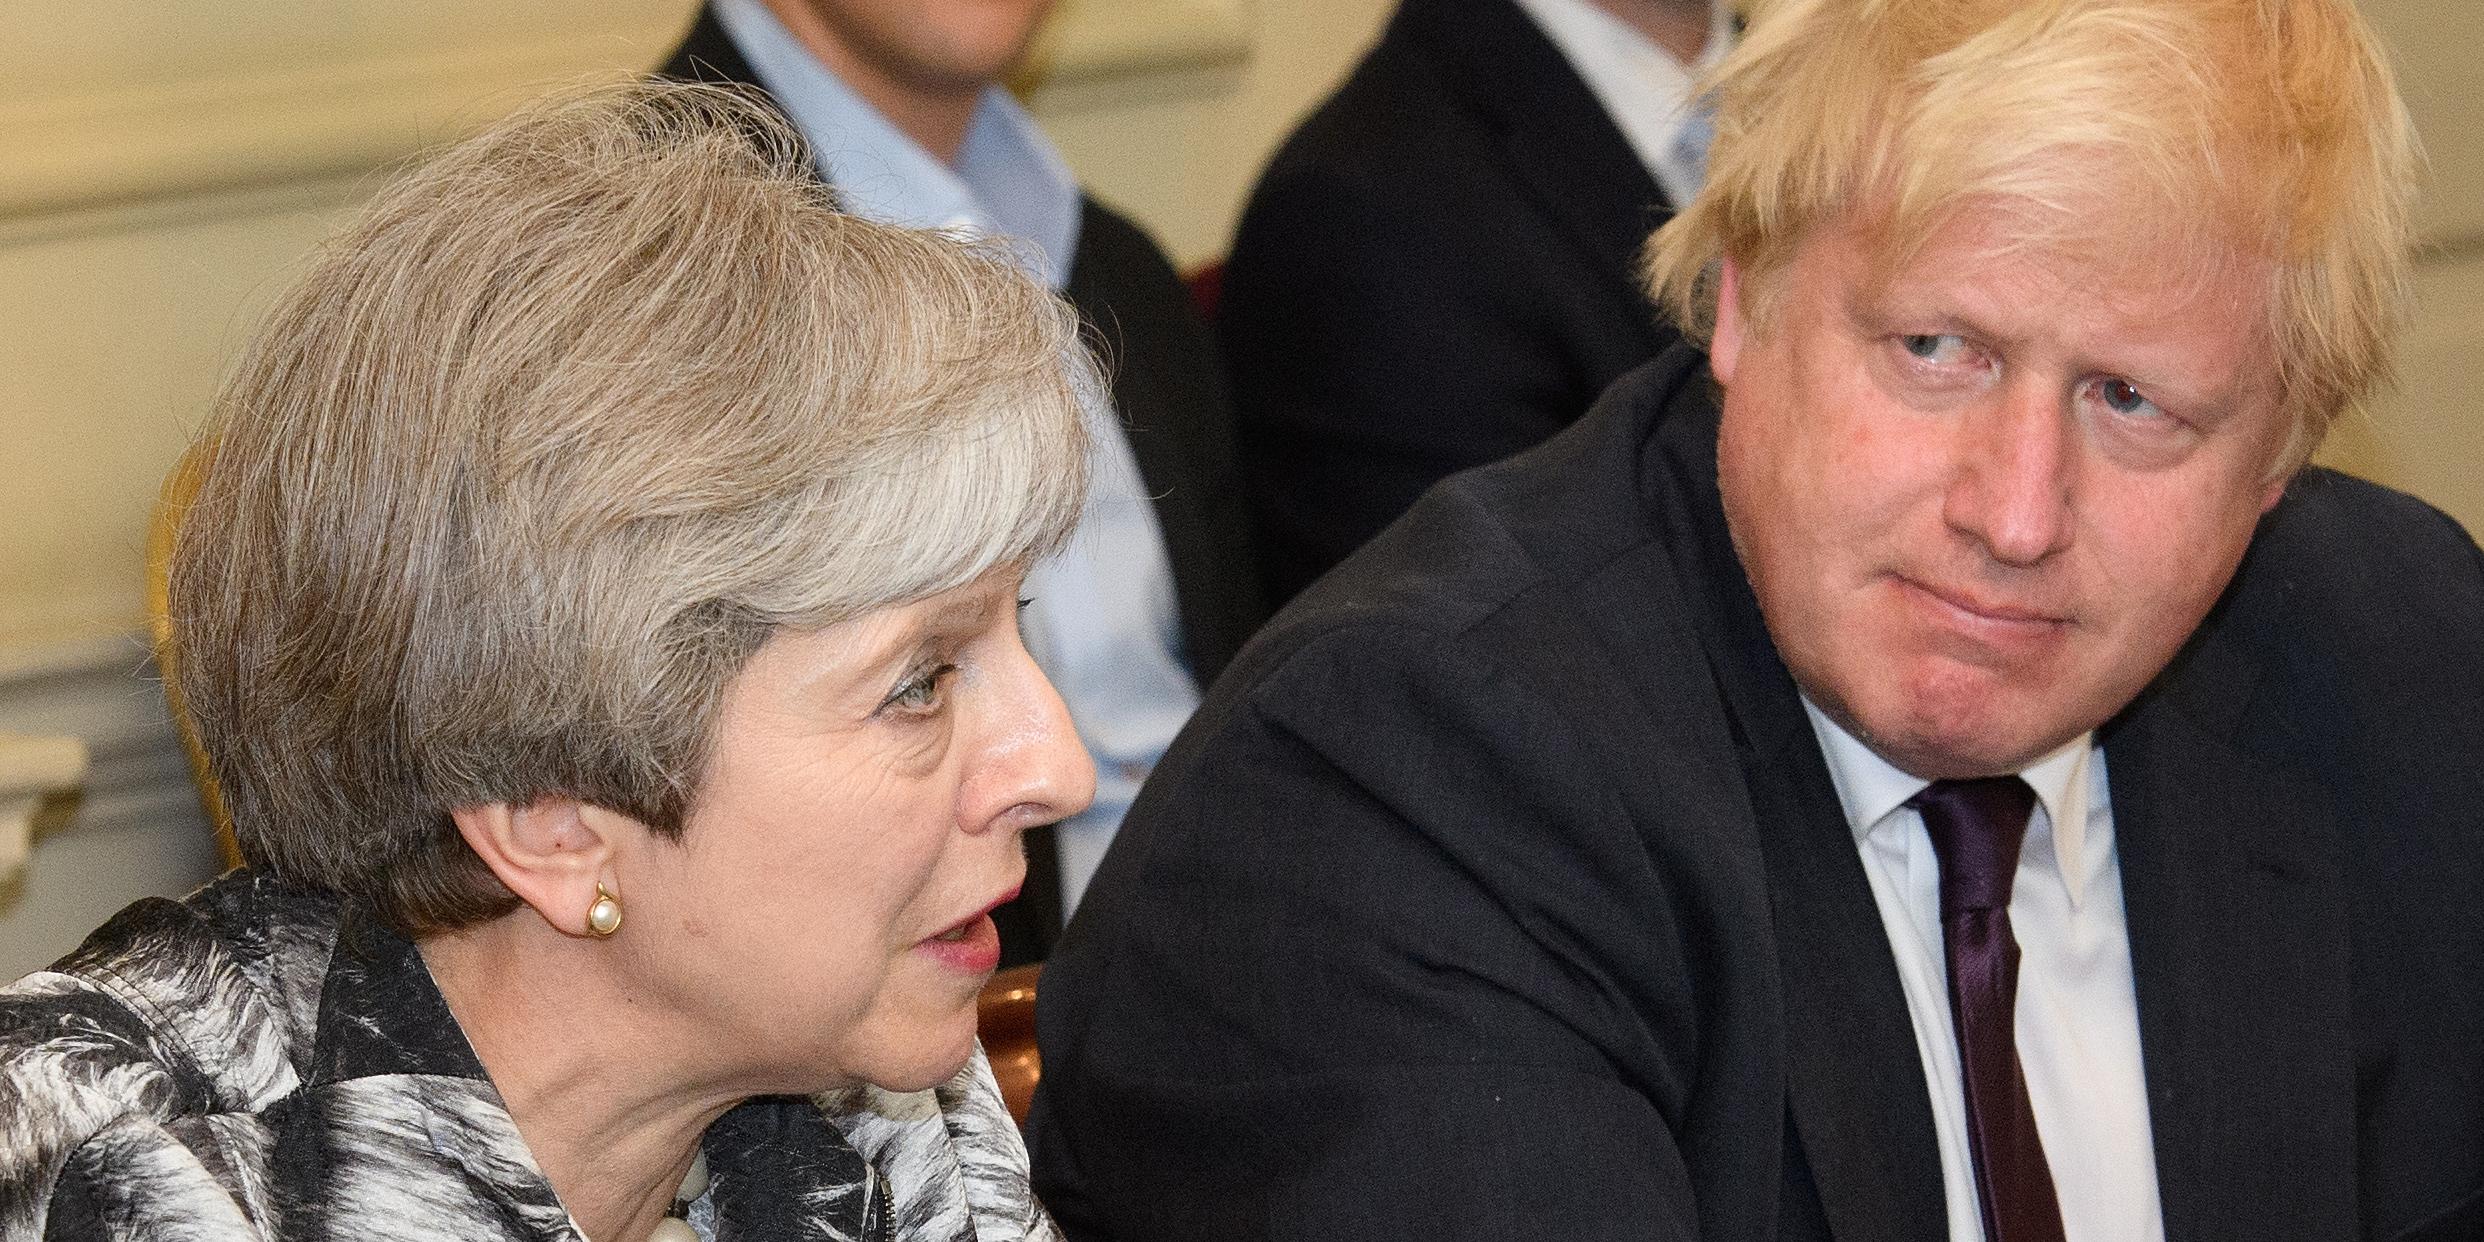 Boris Johnson and Theresa May are at the head of the Tory party's internal conflict over Brexit